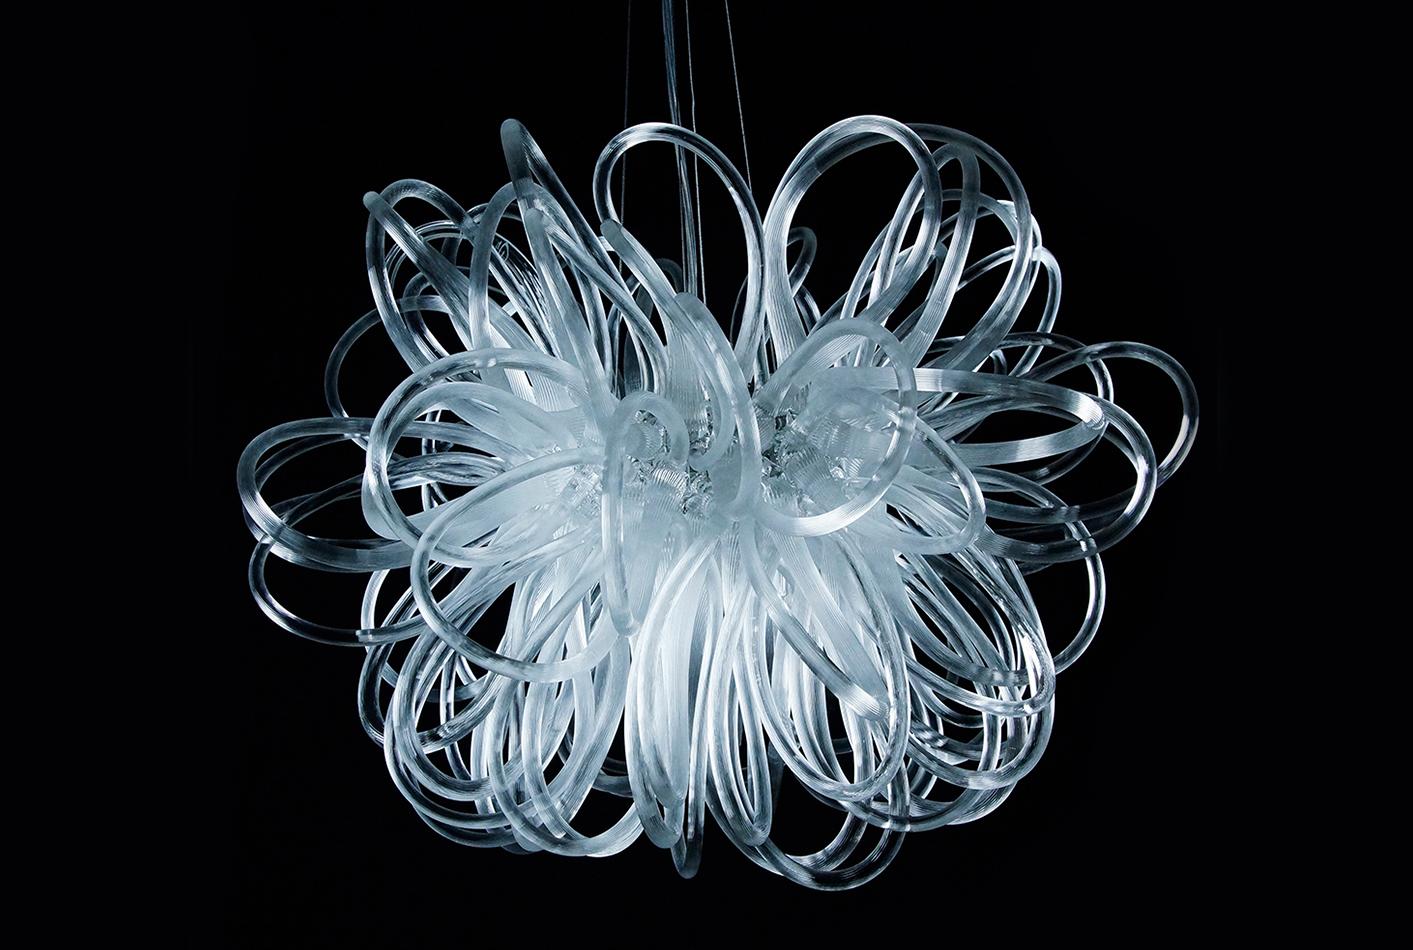 Contemporary chandelier by glass artist Rike Scholle.

Each loop of the pendant light is made individually by hand in Bavaria. 